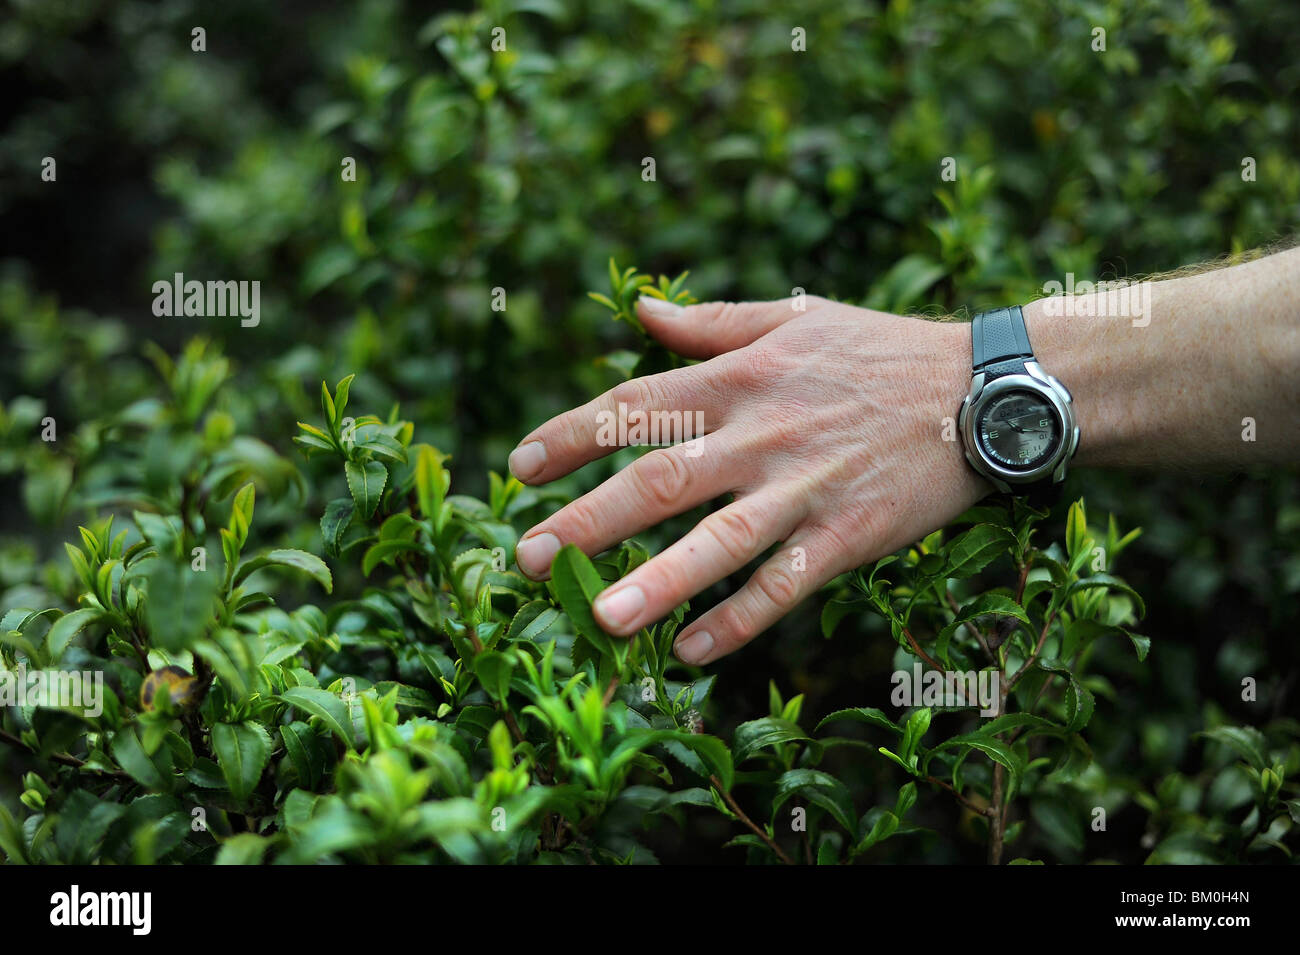 Tea leaves pictured being held at Tregothnan Tea Estate, near Truro, Cornwall, UK. Stock Photo